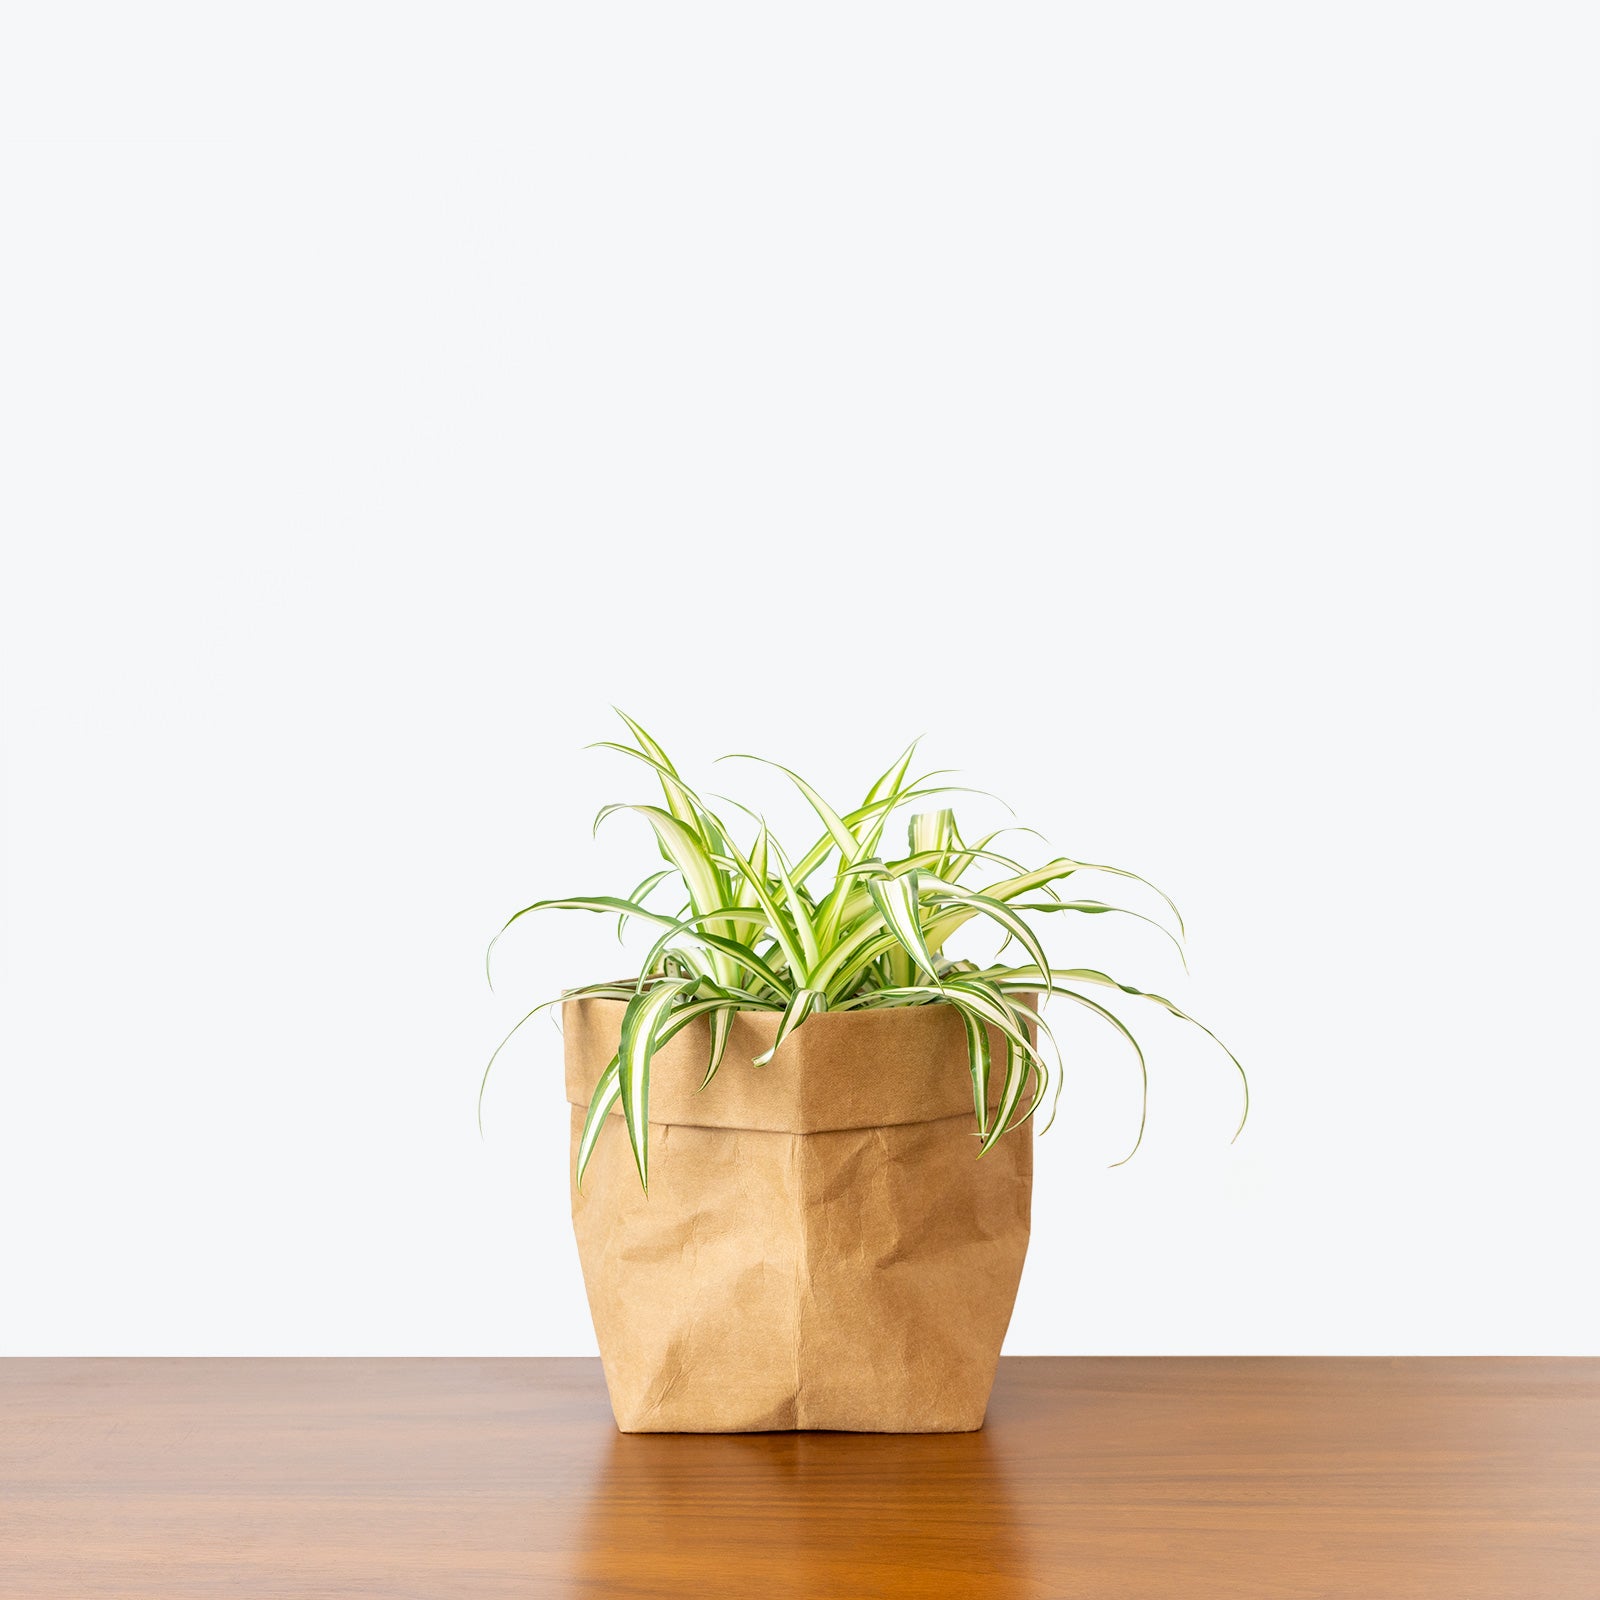 Variegated Spider Plant | Chlorophytum comosum 'Variegatum' | Care Guide and Pro Tips - Delivery from Toronto across Canada - JOMO Studio